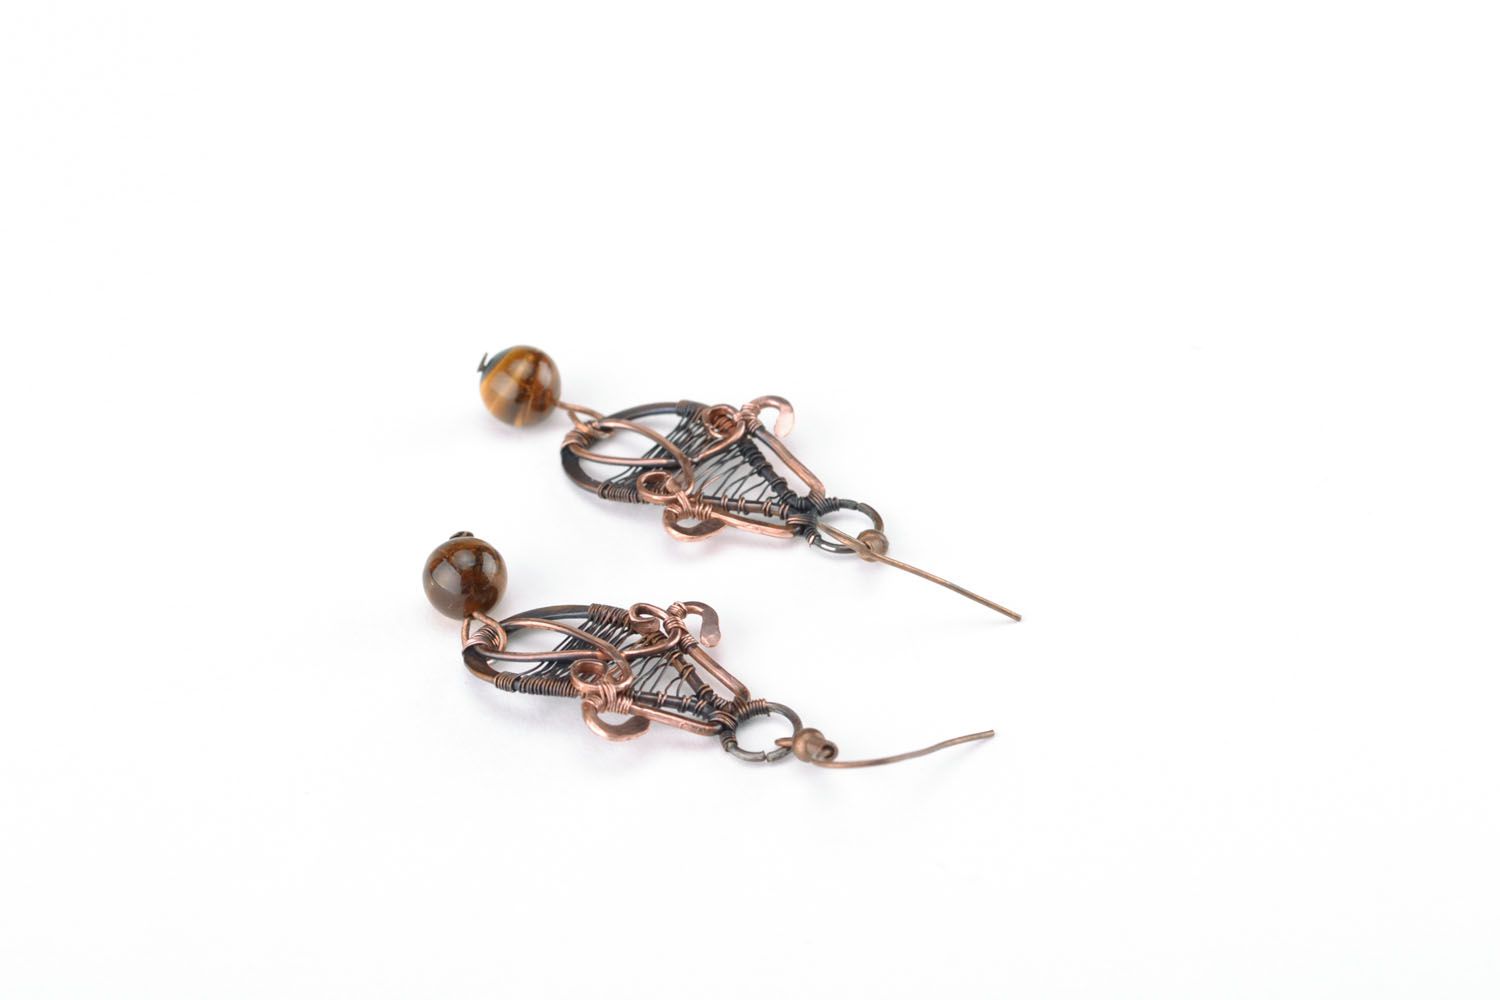 Copper earrings with tiger eye stone photo 3